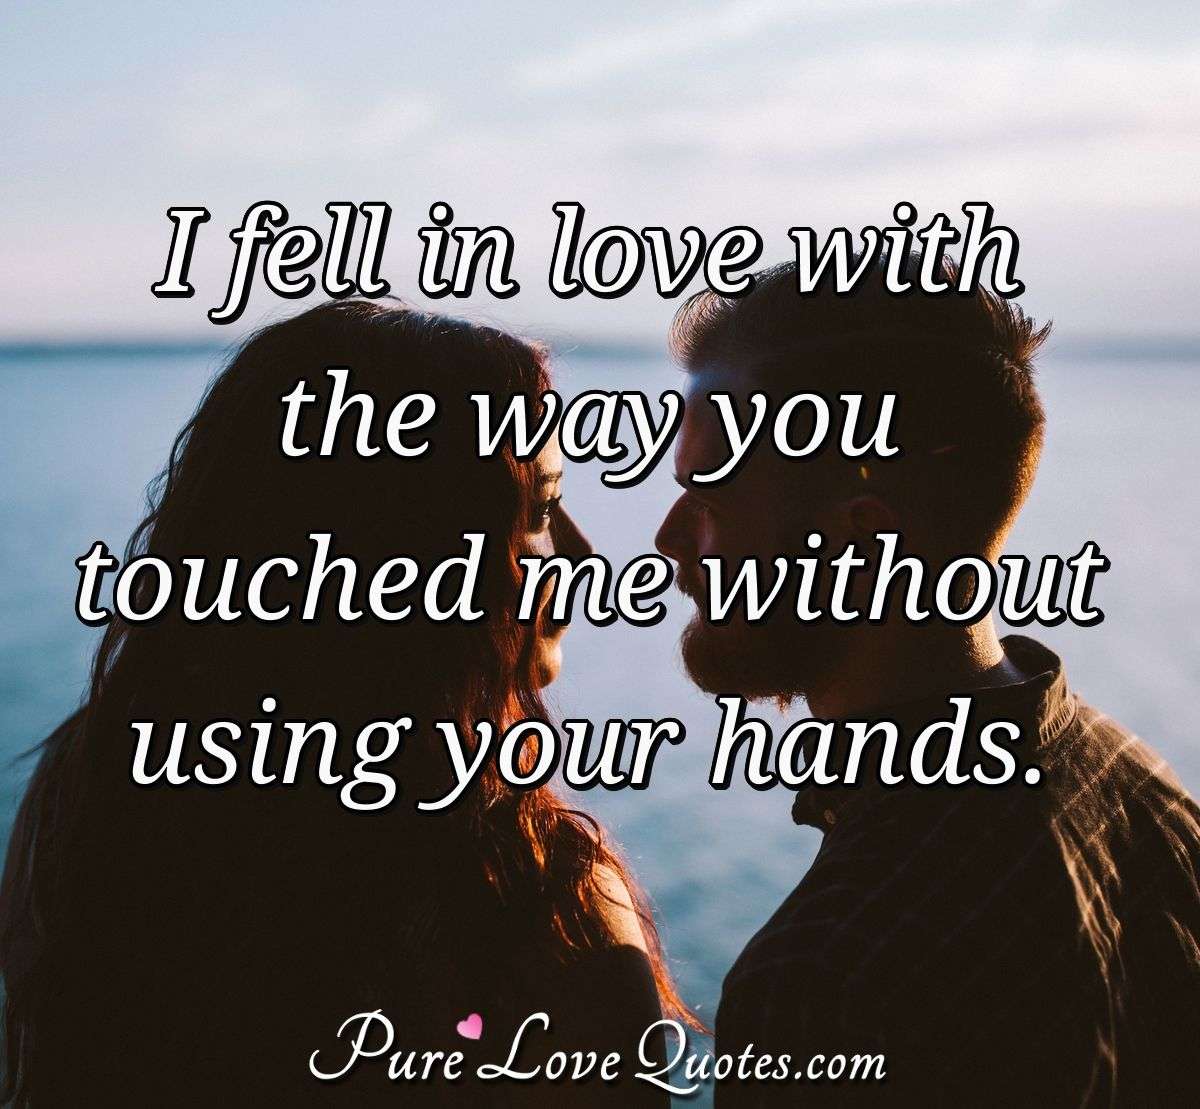 I fell in love with the way you touched me without using your hands. - Anonymous